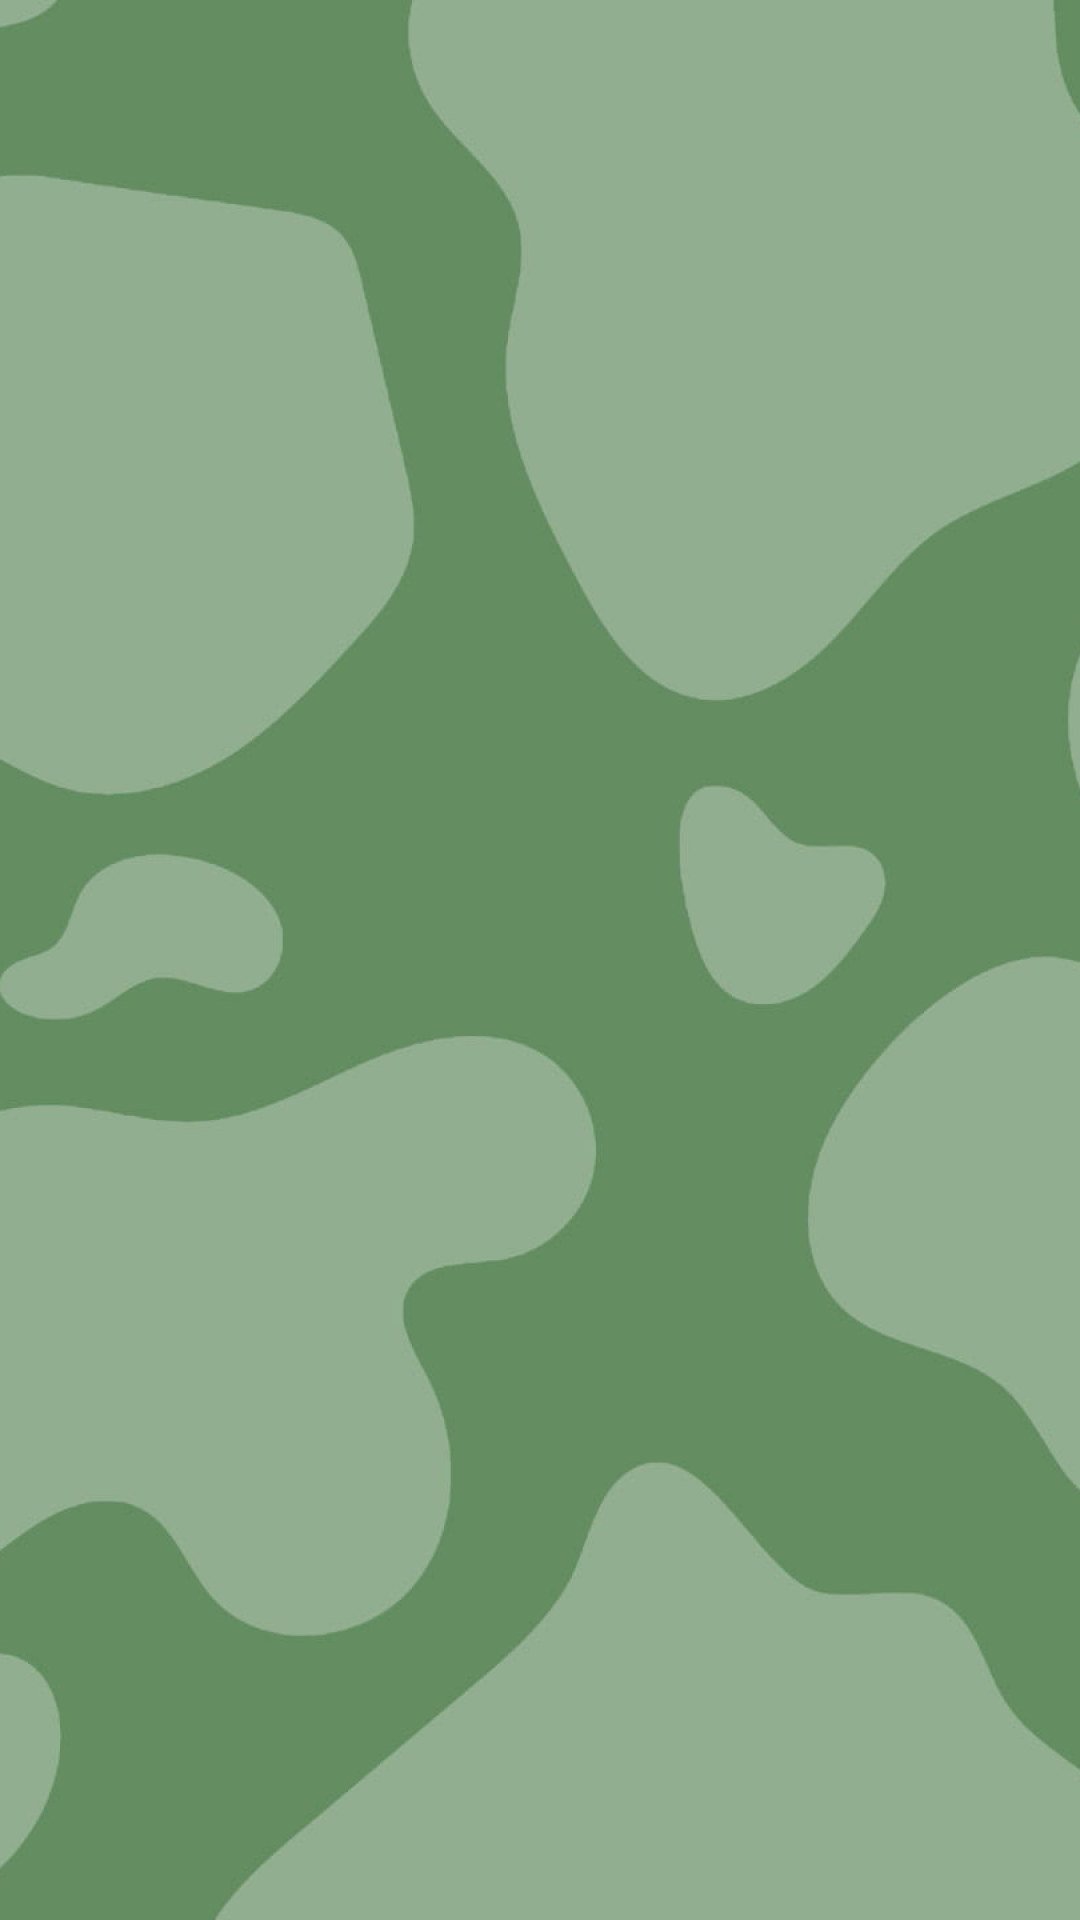 Green camouflage wallpaper for your phone - Green, sage green